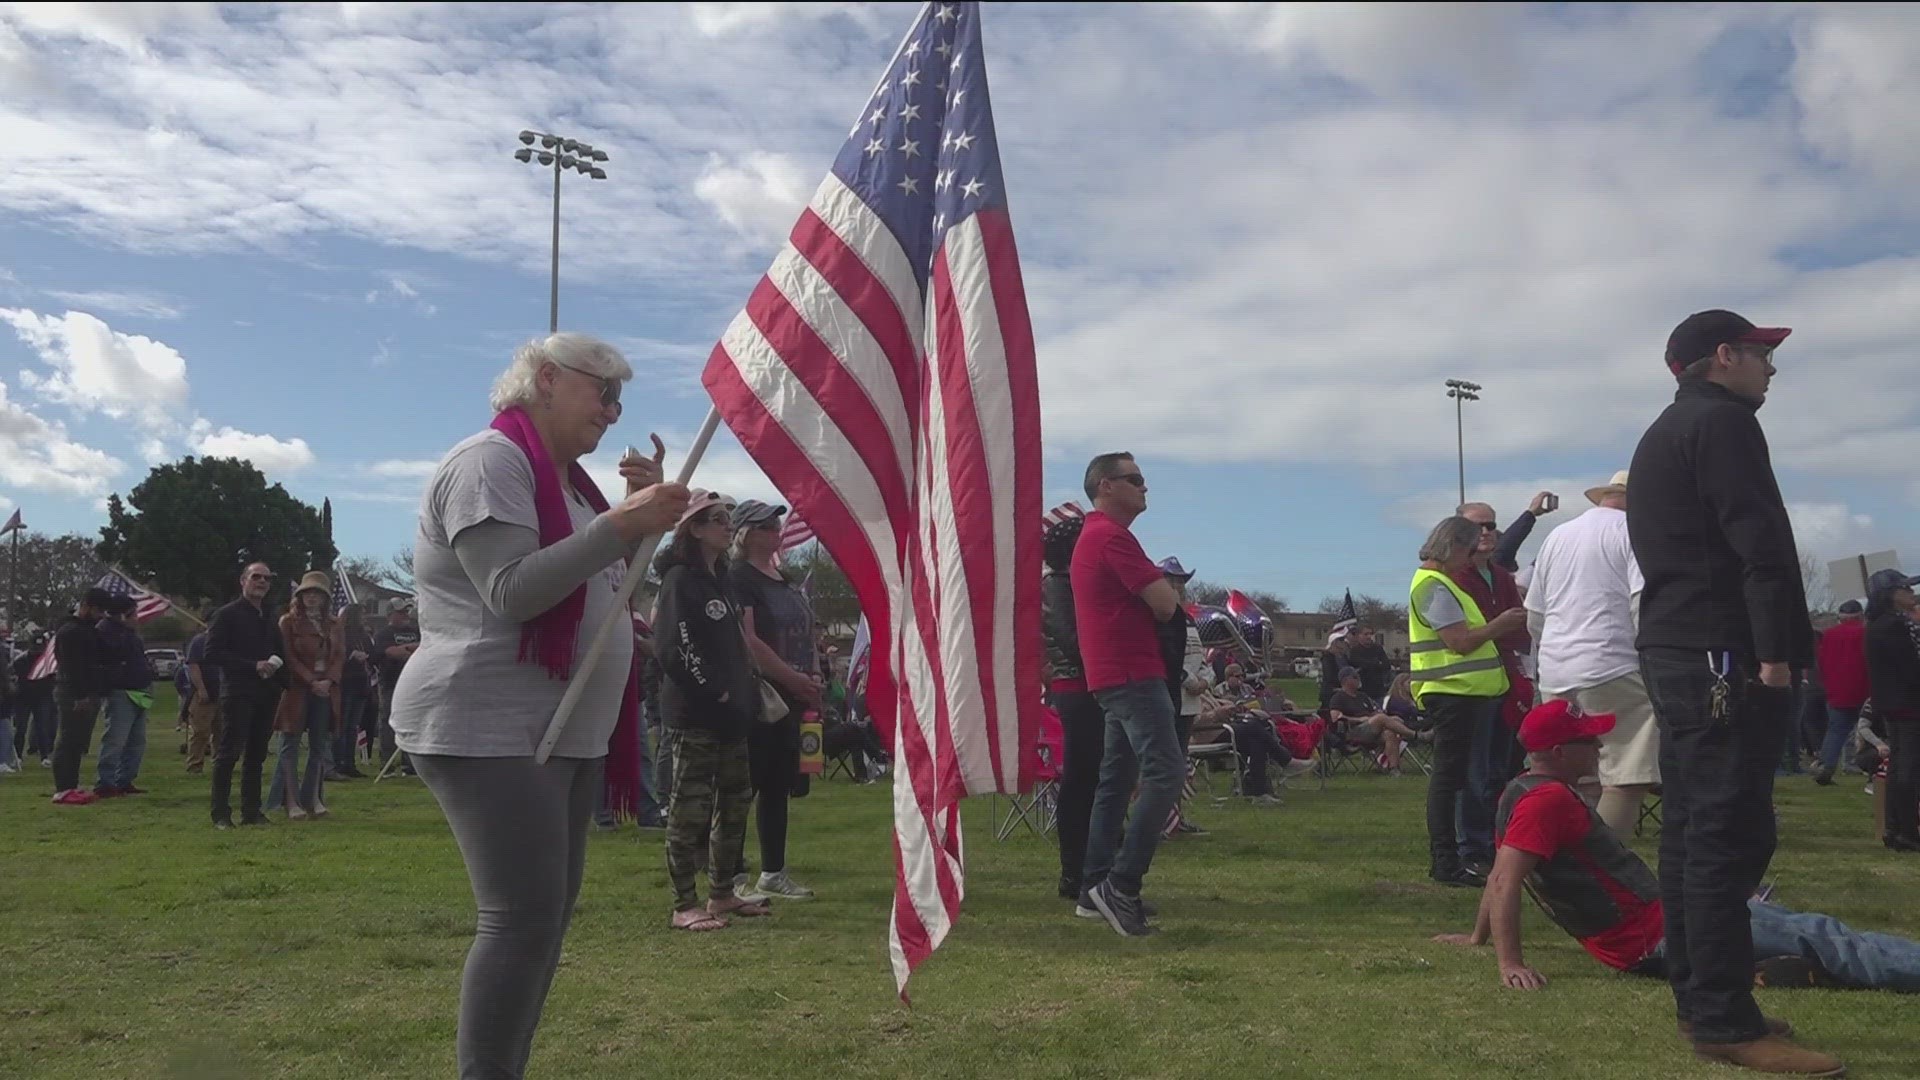 Counter protestors attended to spread the message of liberation for all people in contradiction to the nationwide border convoy in favor of tight border security.